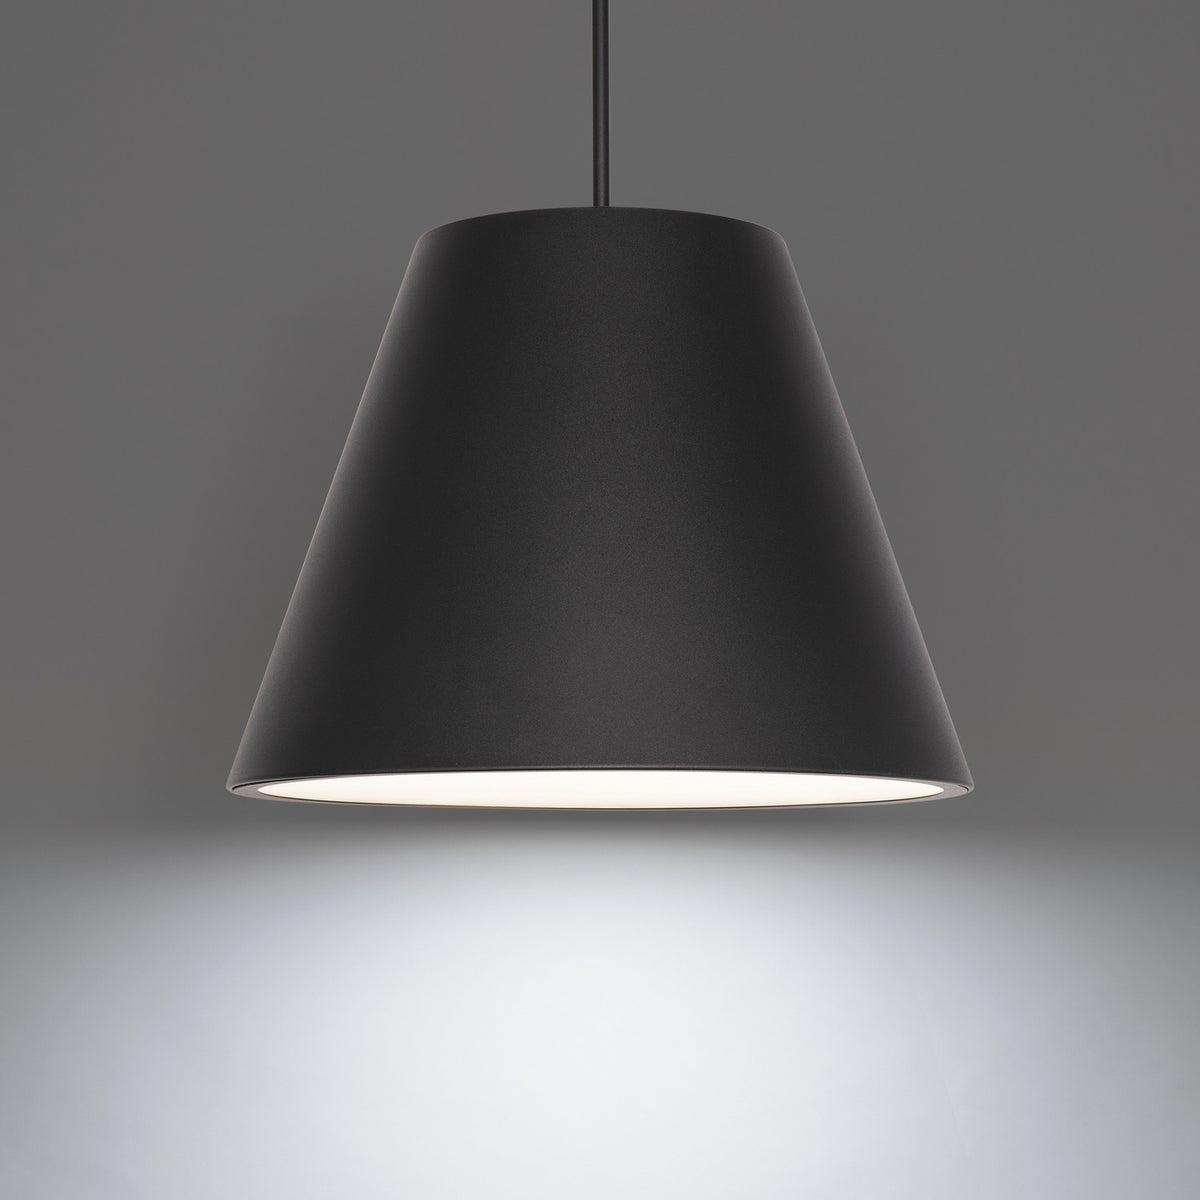 Modern Forms Canada - PD-W24320-40-BK - LED Outdoor Pendant - Myla - Black